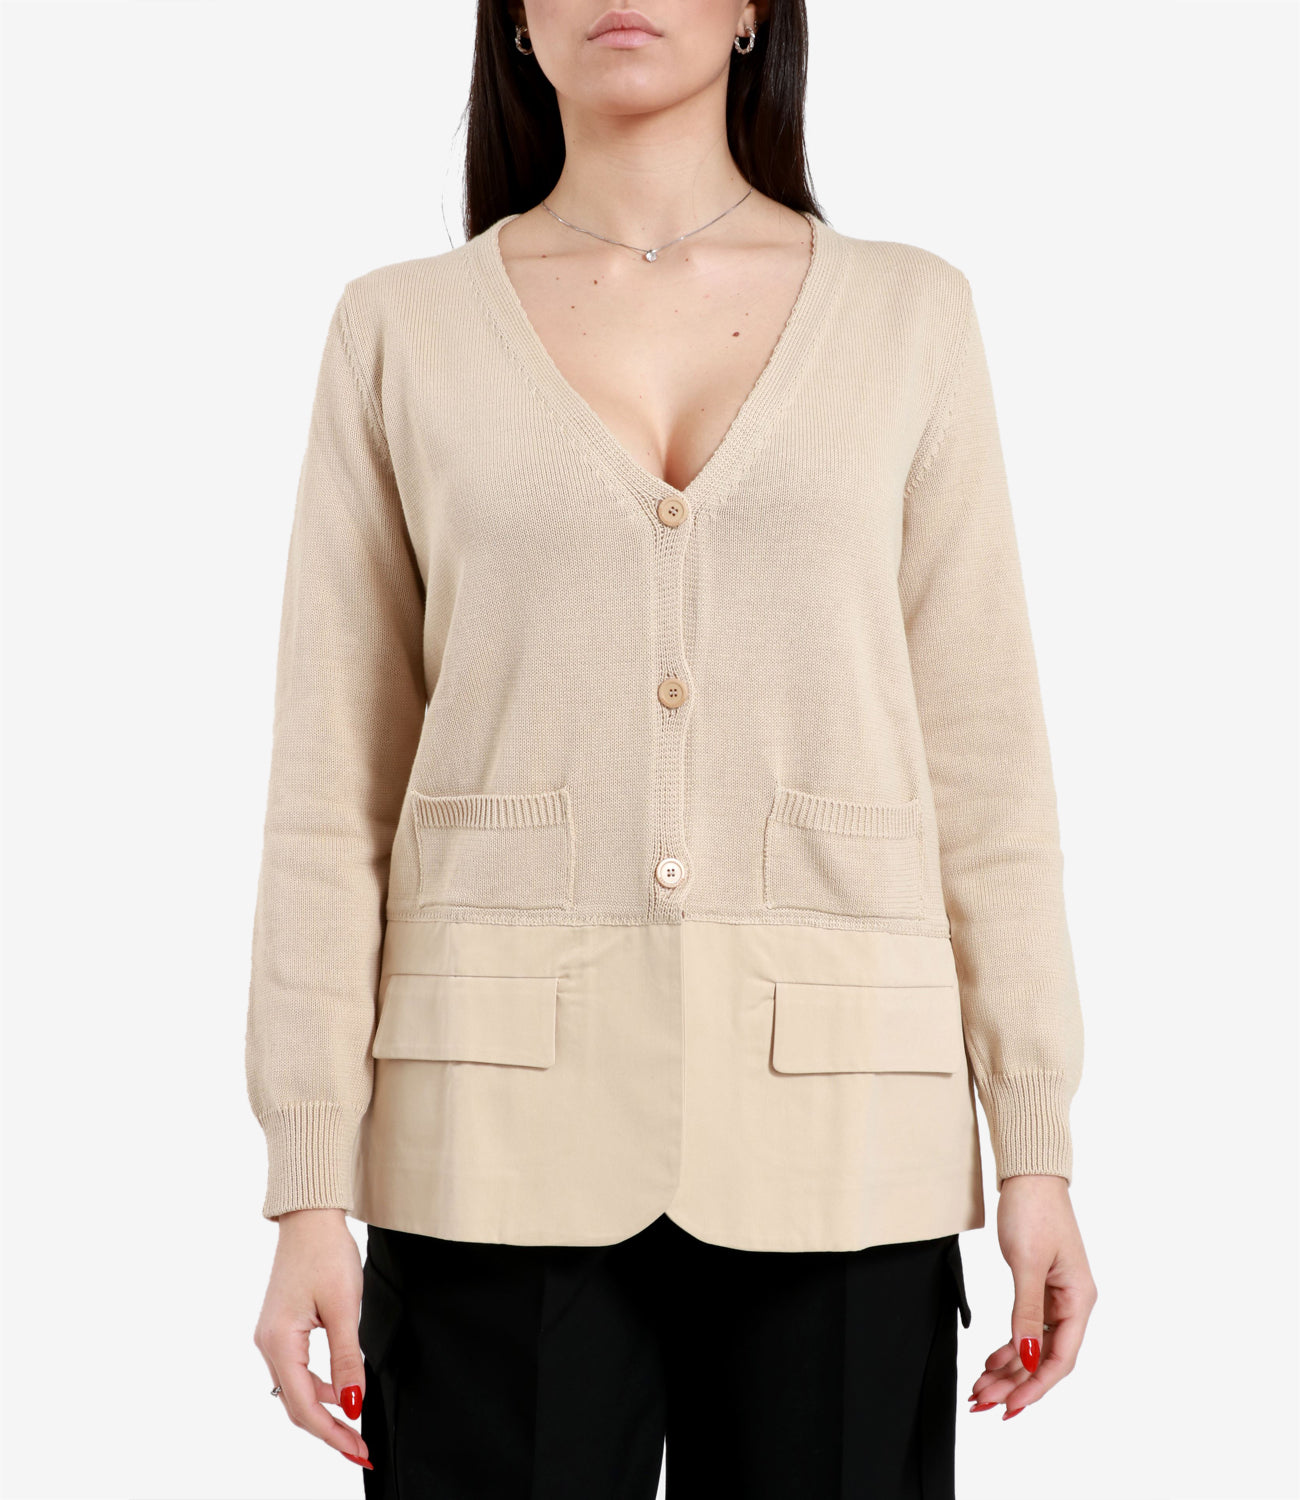 Semicouture | Mely Camel Jacket